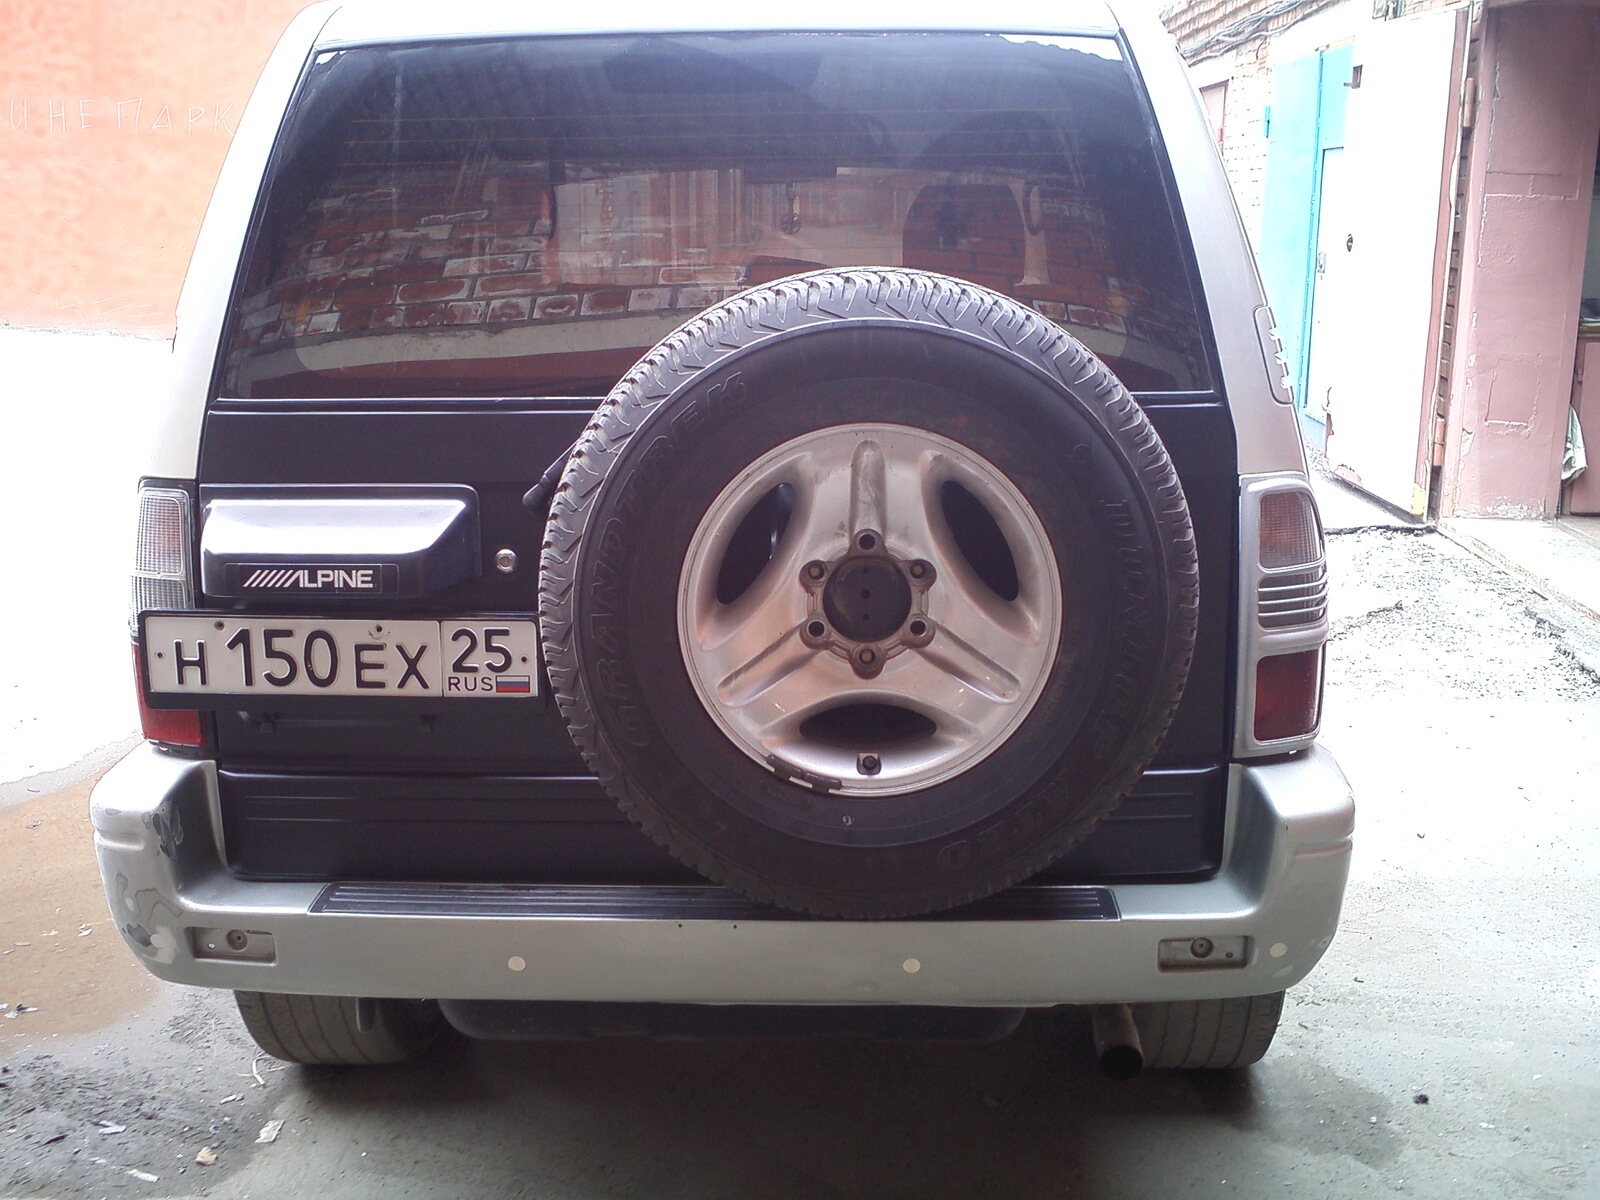 A little new wrapped with a film etc - Toyota Land Cruiser Prado 27 L 2000